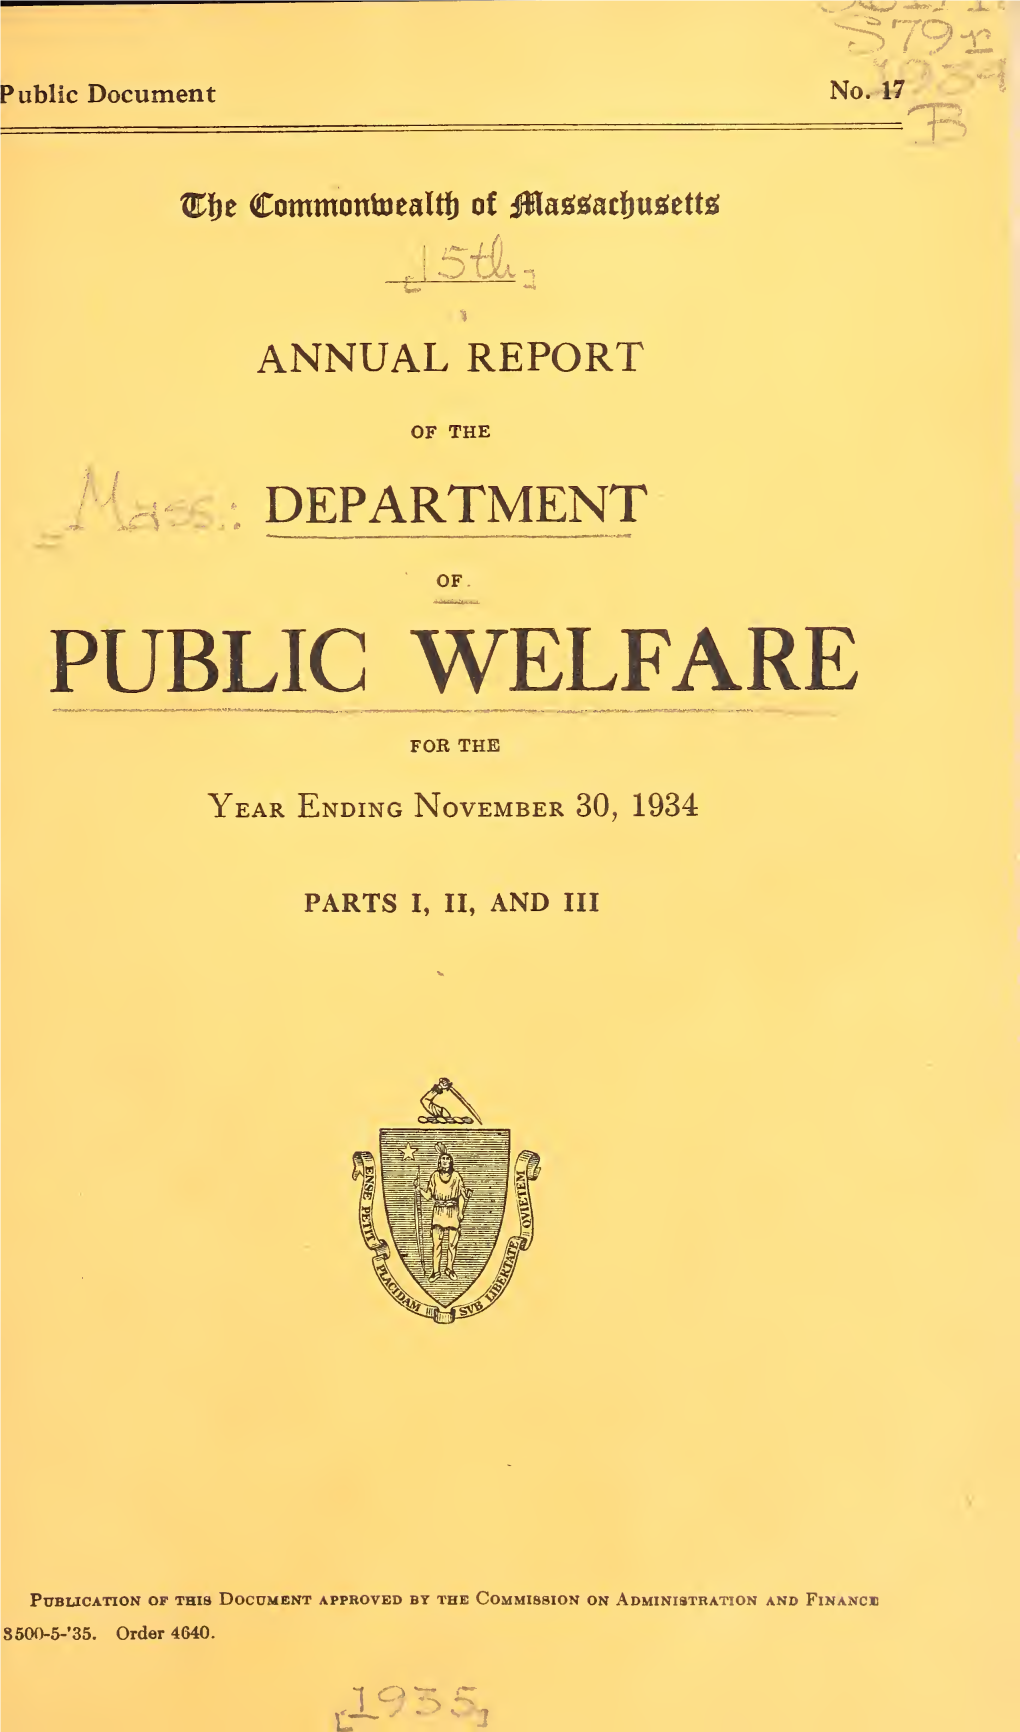 Annual Report of the Department of Public Welfare, Covering the Year from December 1, 1933, to November 30, 1934, Is Herewith Respectfully- Presented